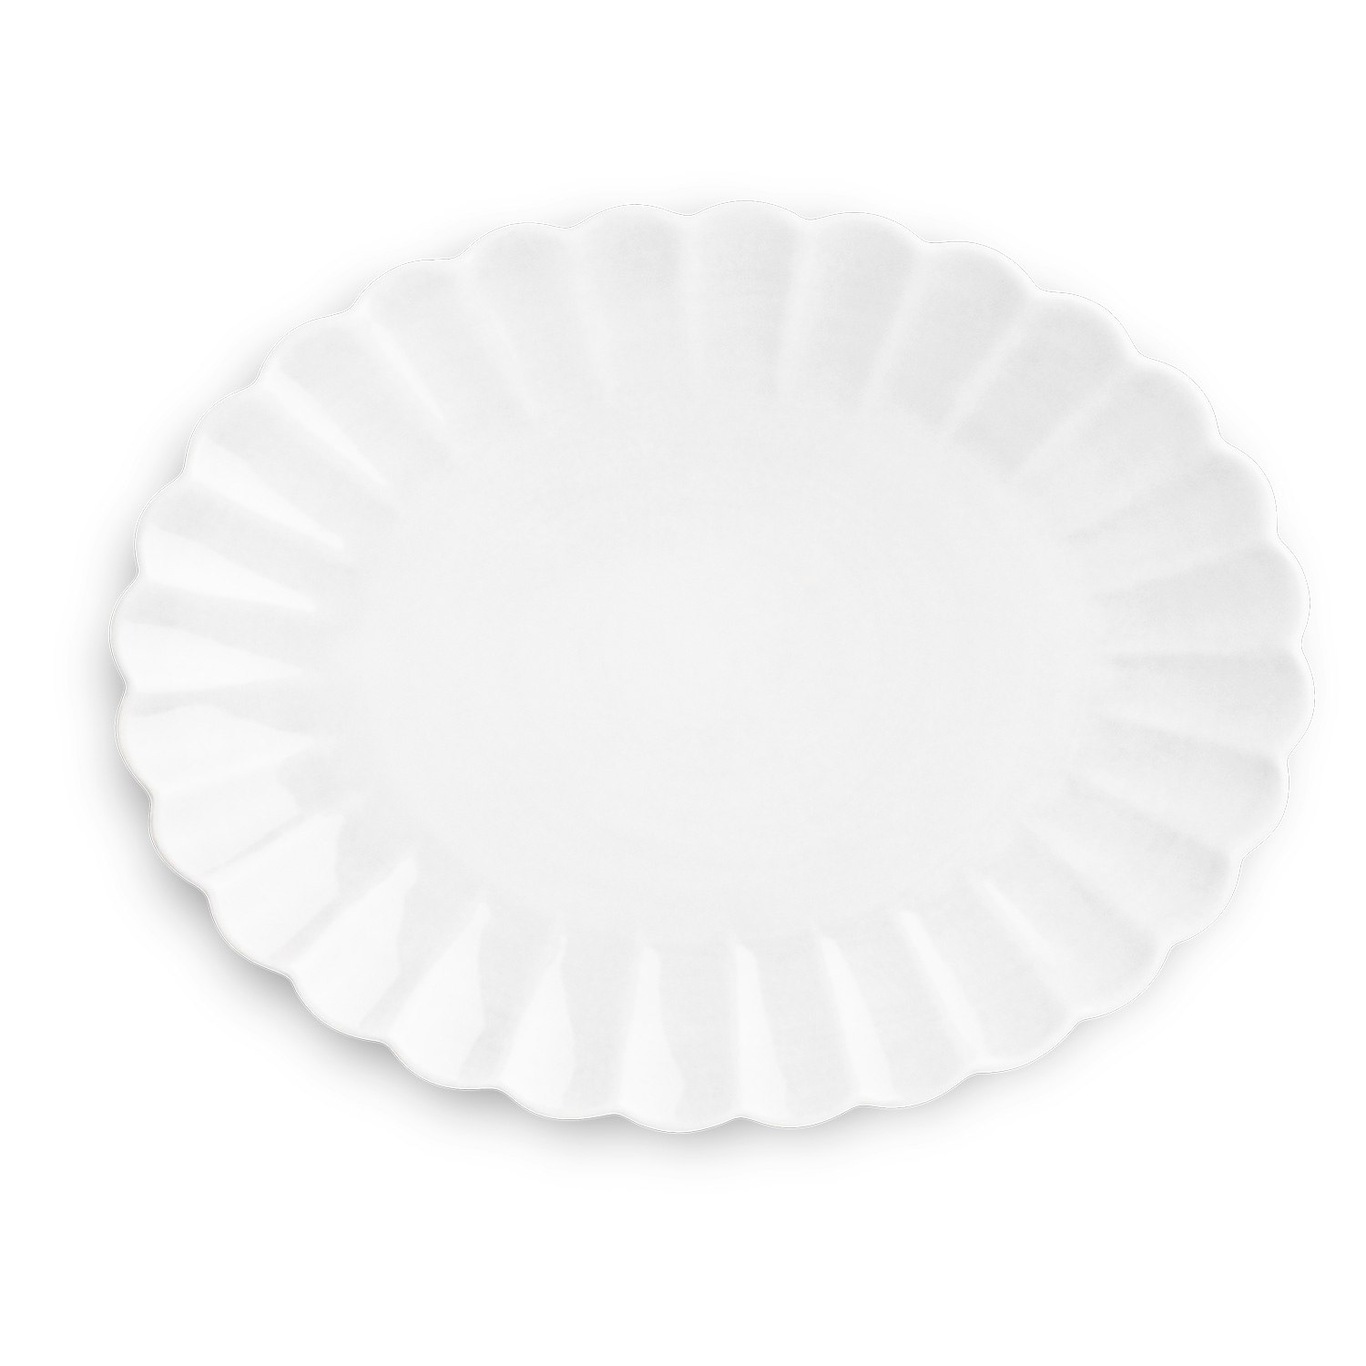 Oyster Dish 35x30 cm, White